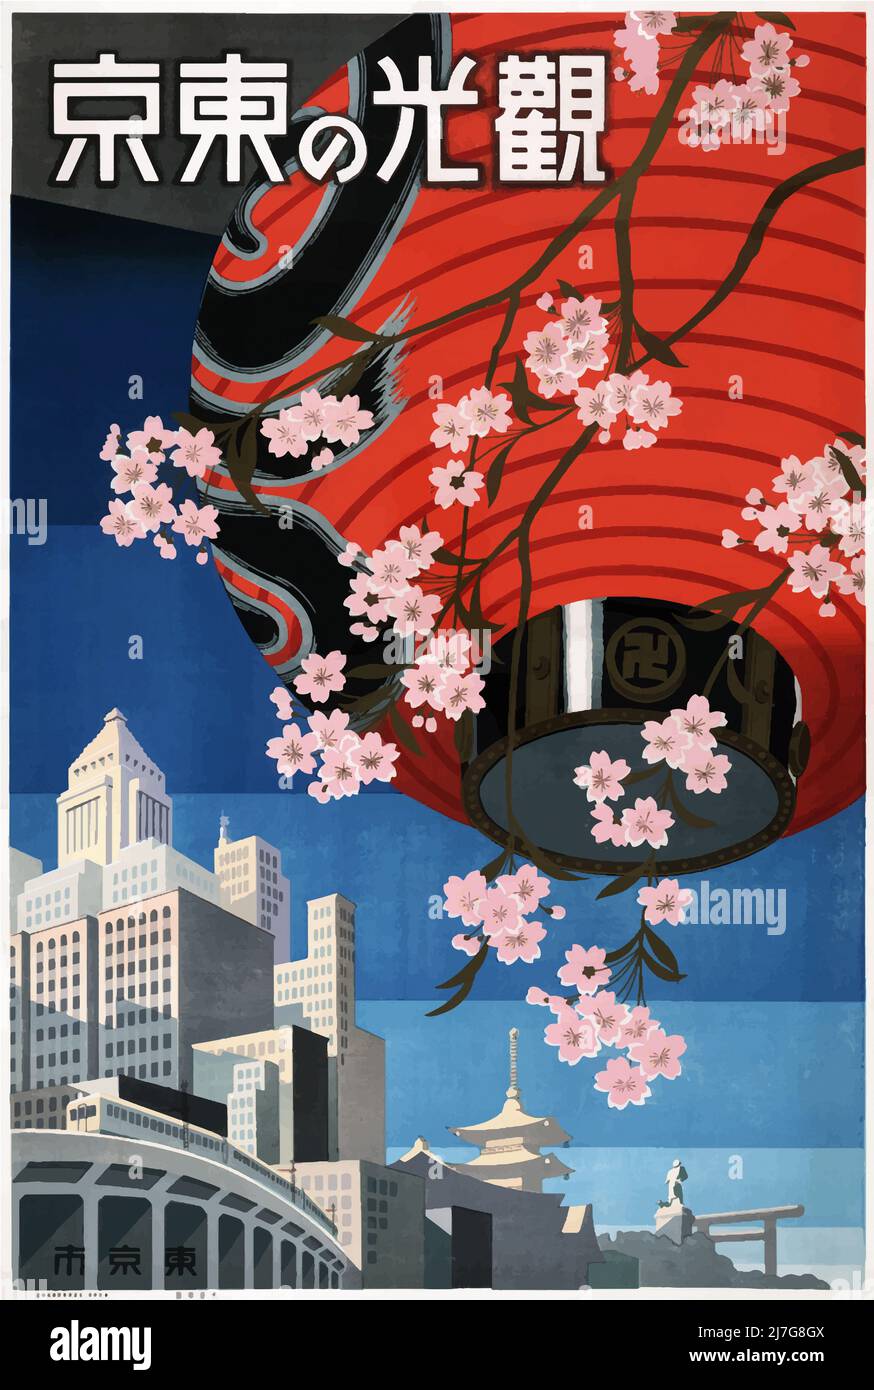 Vintage 1930s Japanese Travel Poster - Come to Tokyo Stock Photo